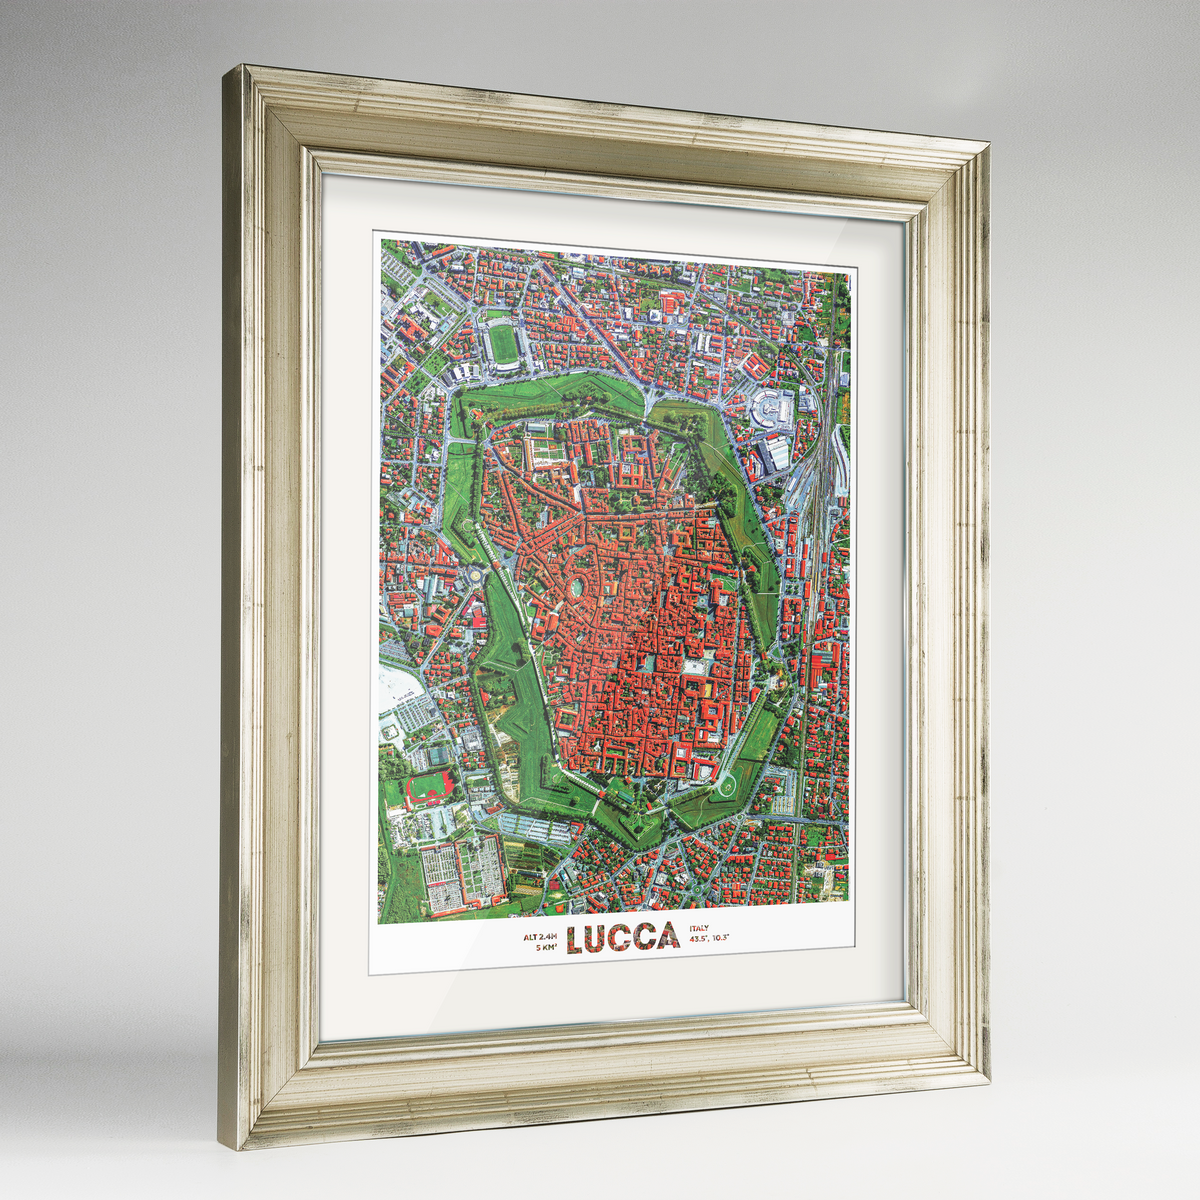 Lucca Earth Photography Art Print - Framed